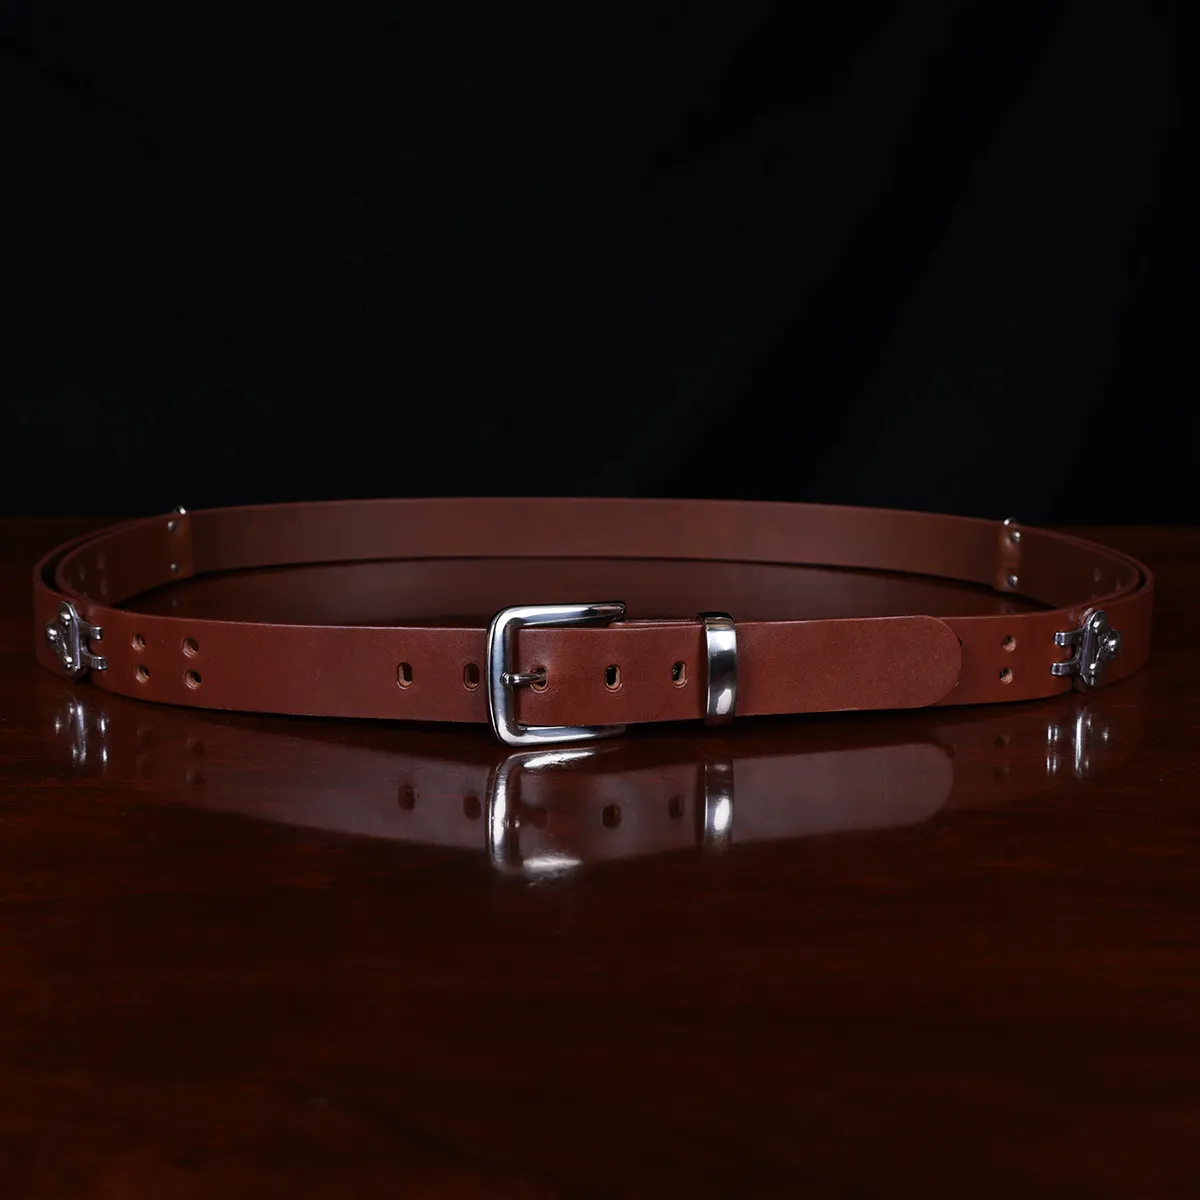 no1 brown leather belt with nickel hardware - front view - on a wooden table with a black background